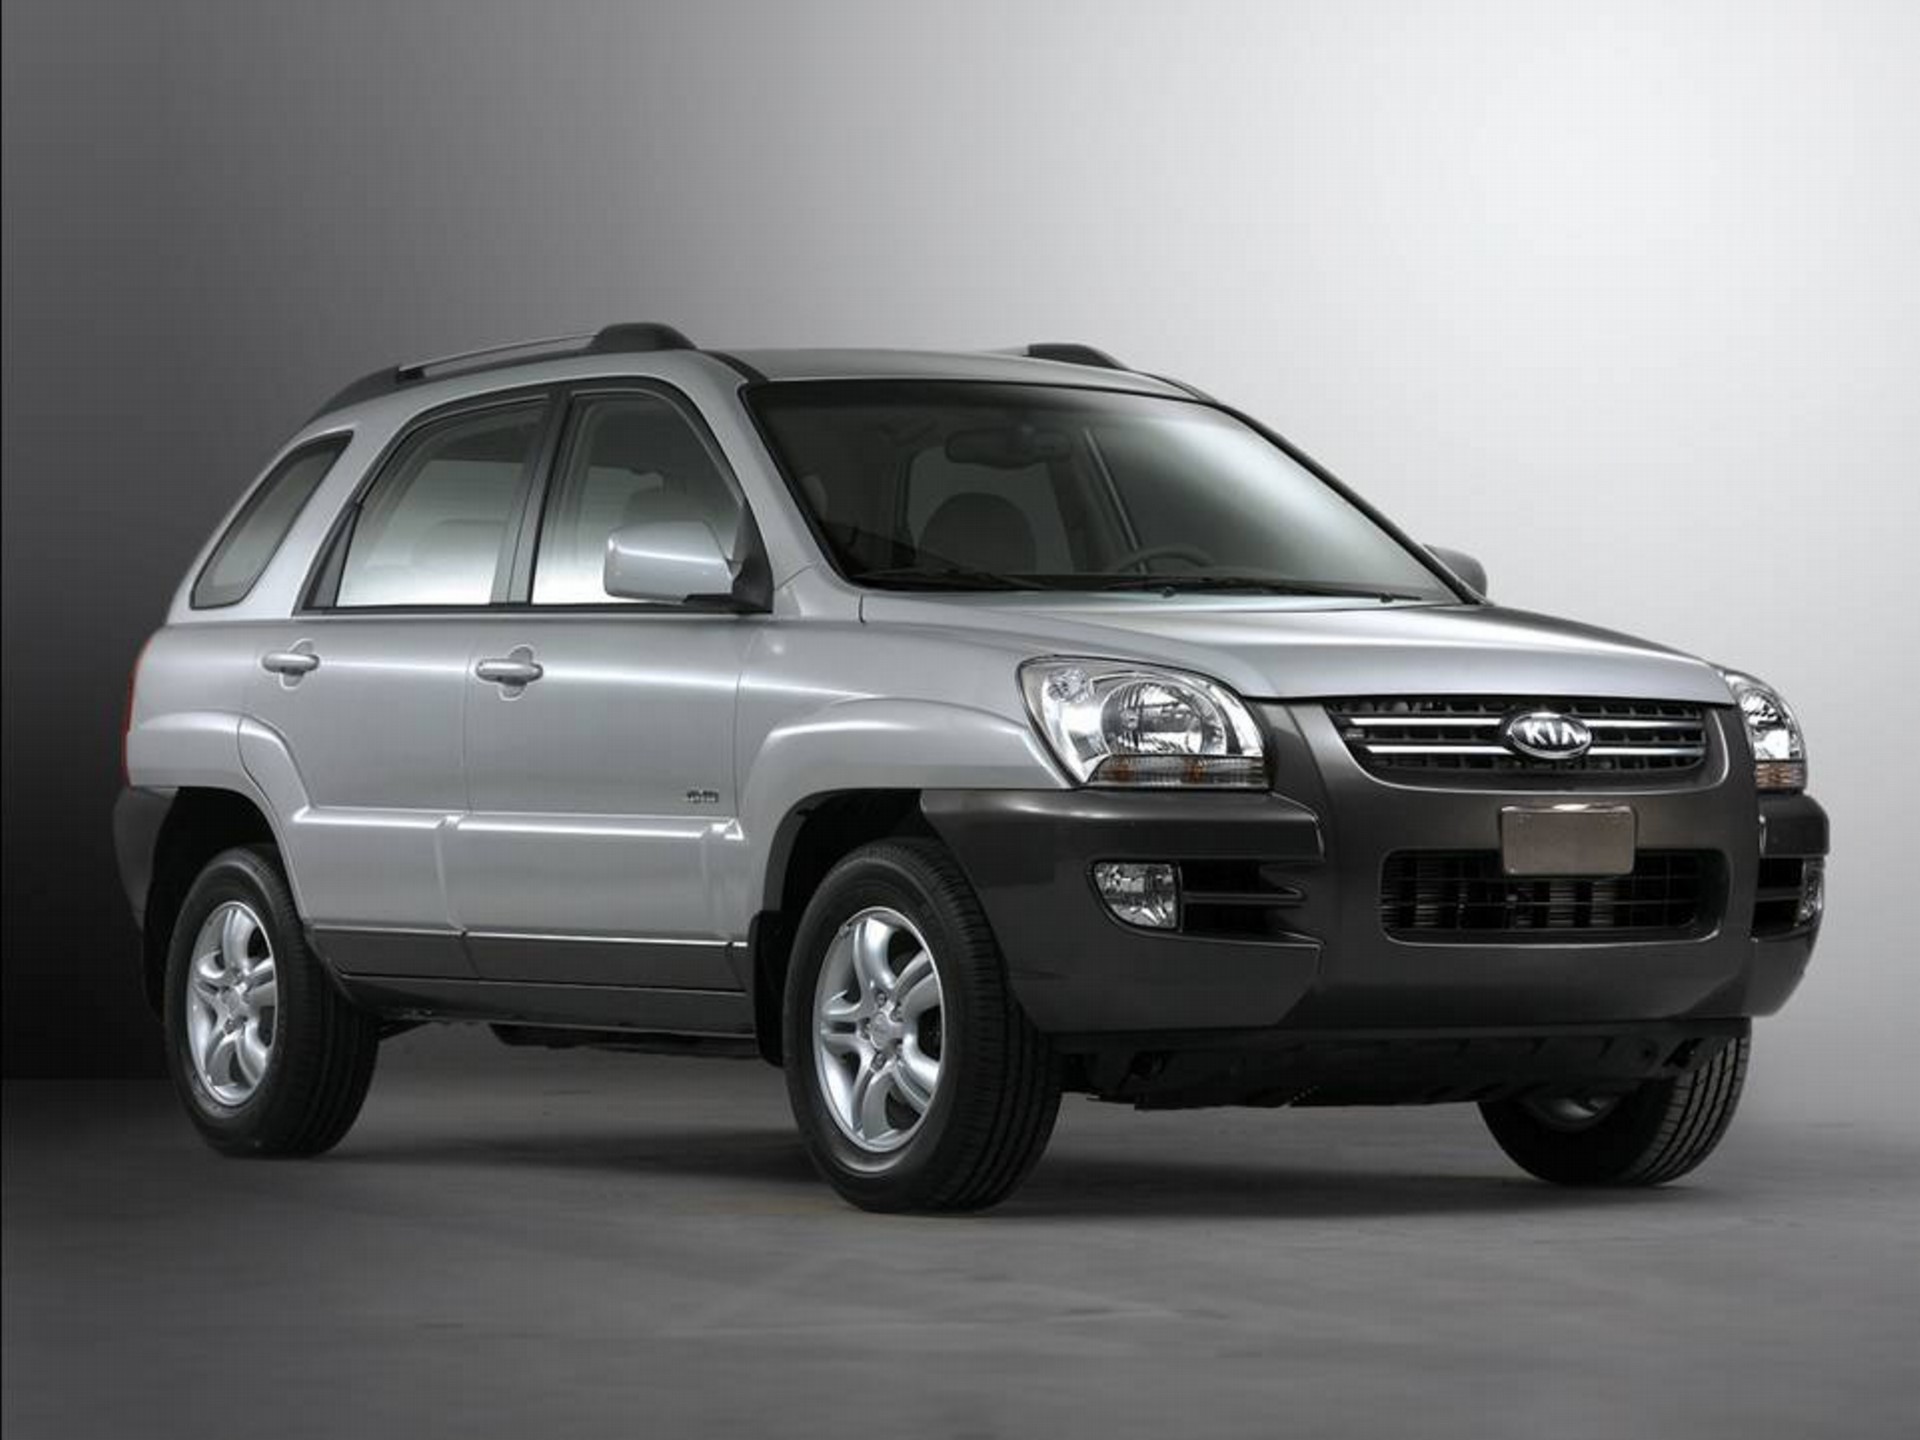 2007 Kia Sportage Pictures, History, Value, Research, News